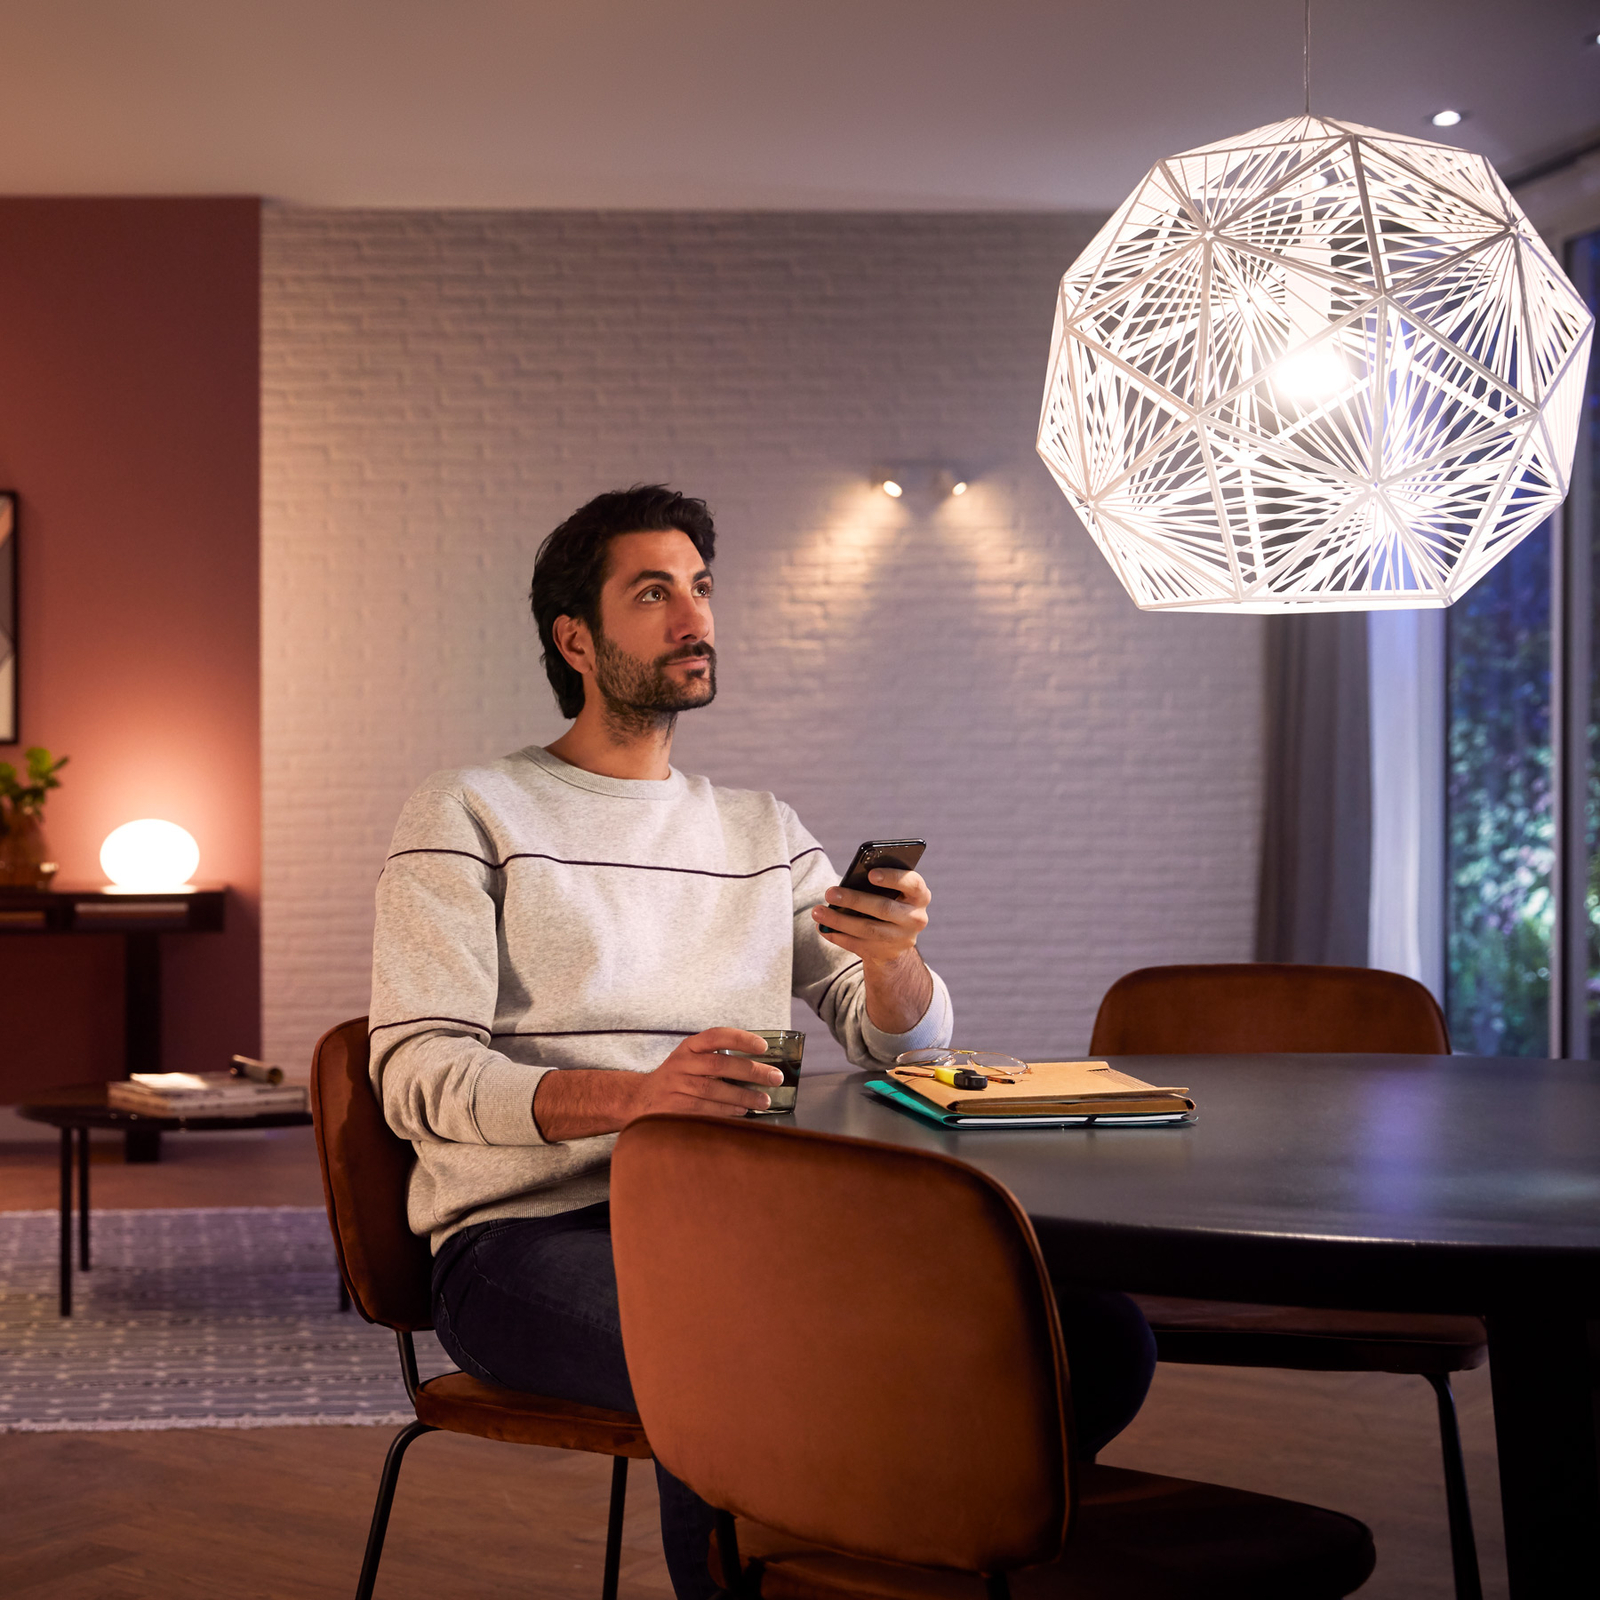 Philips Hue White&Color Ambiance E27 9W 1100lm 2er